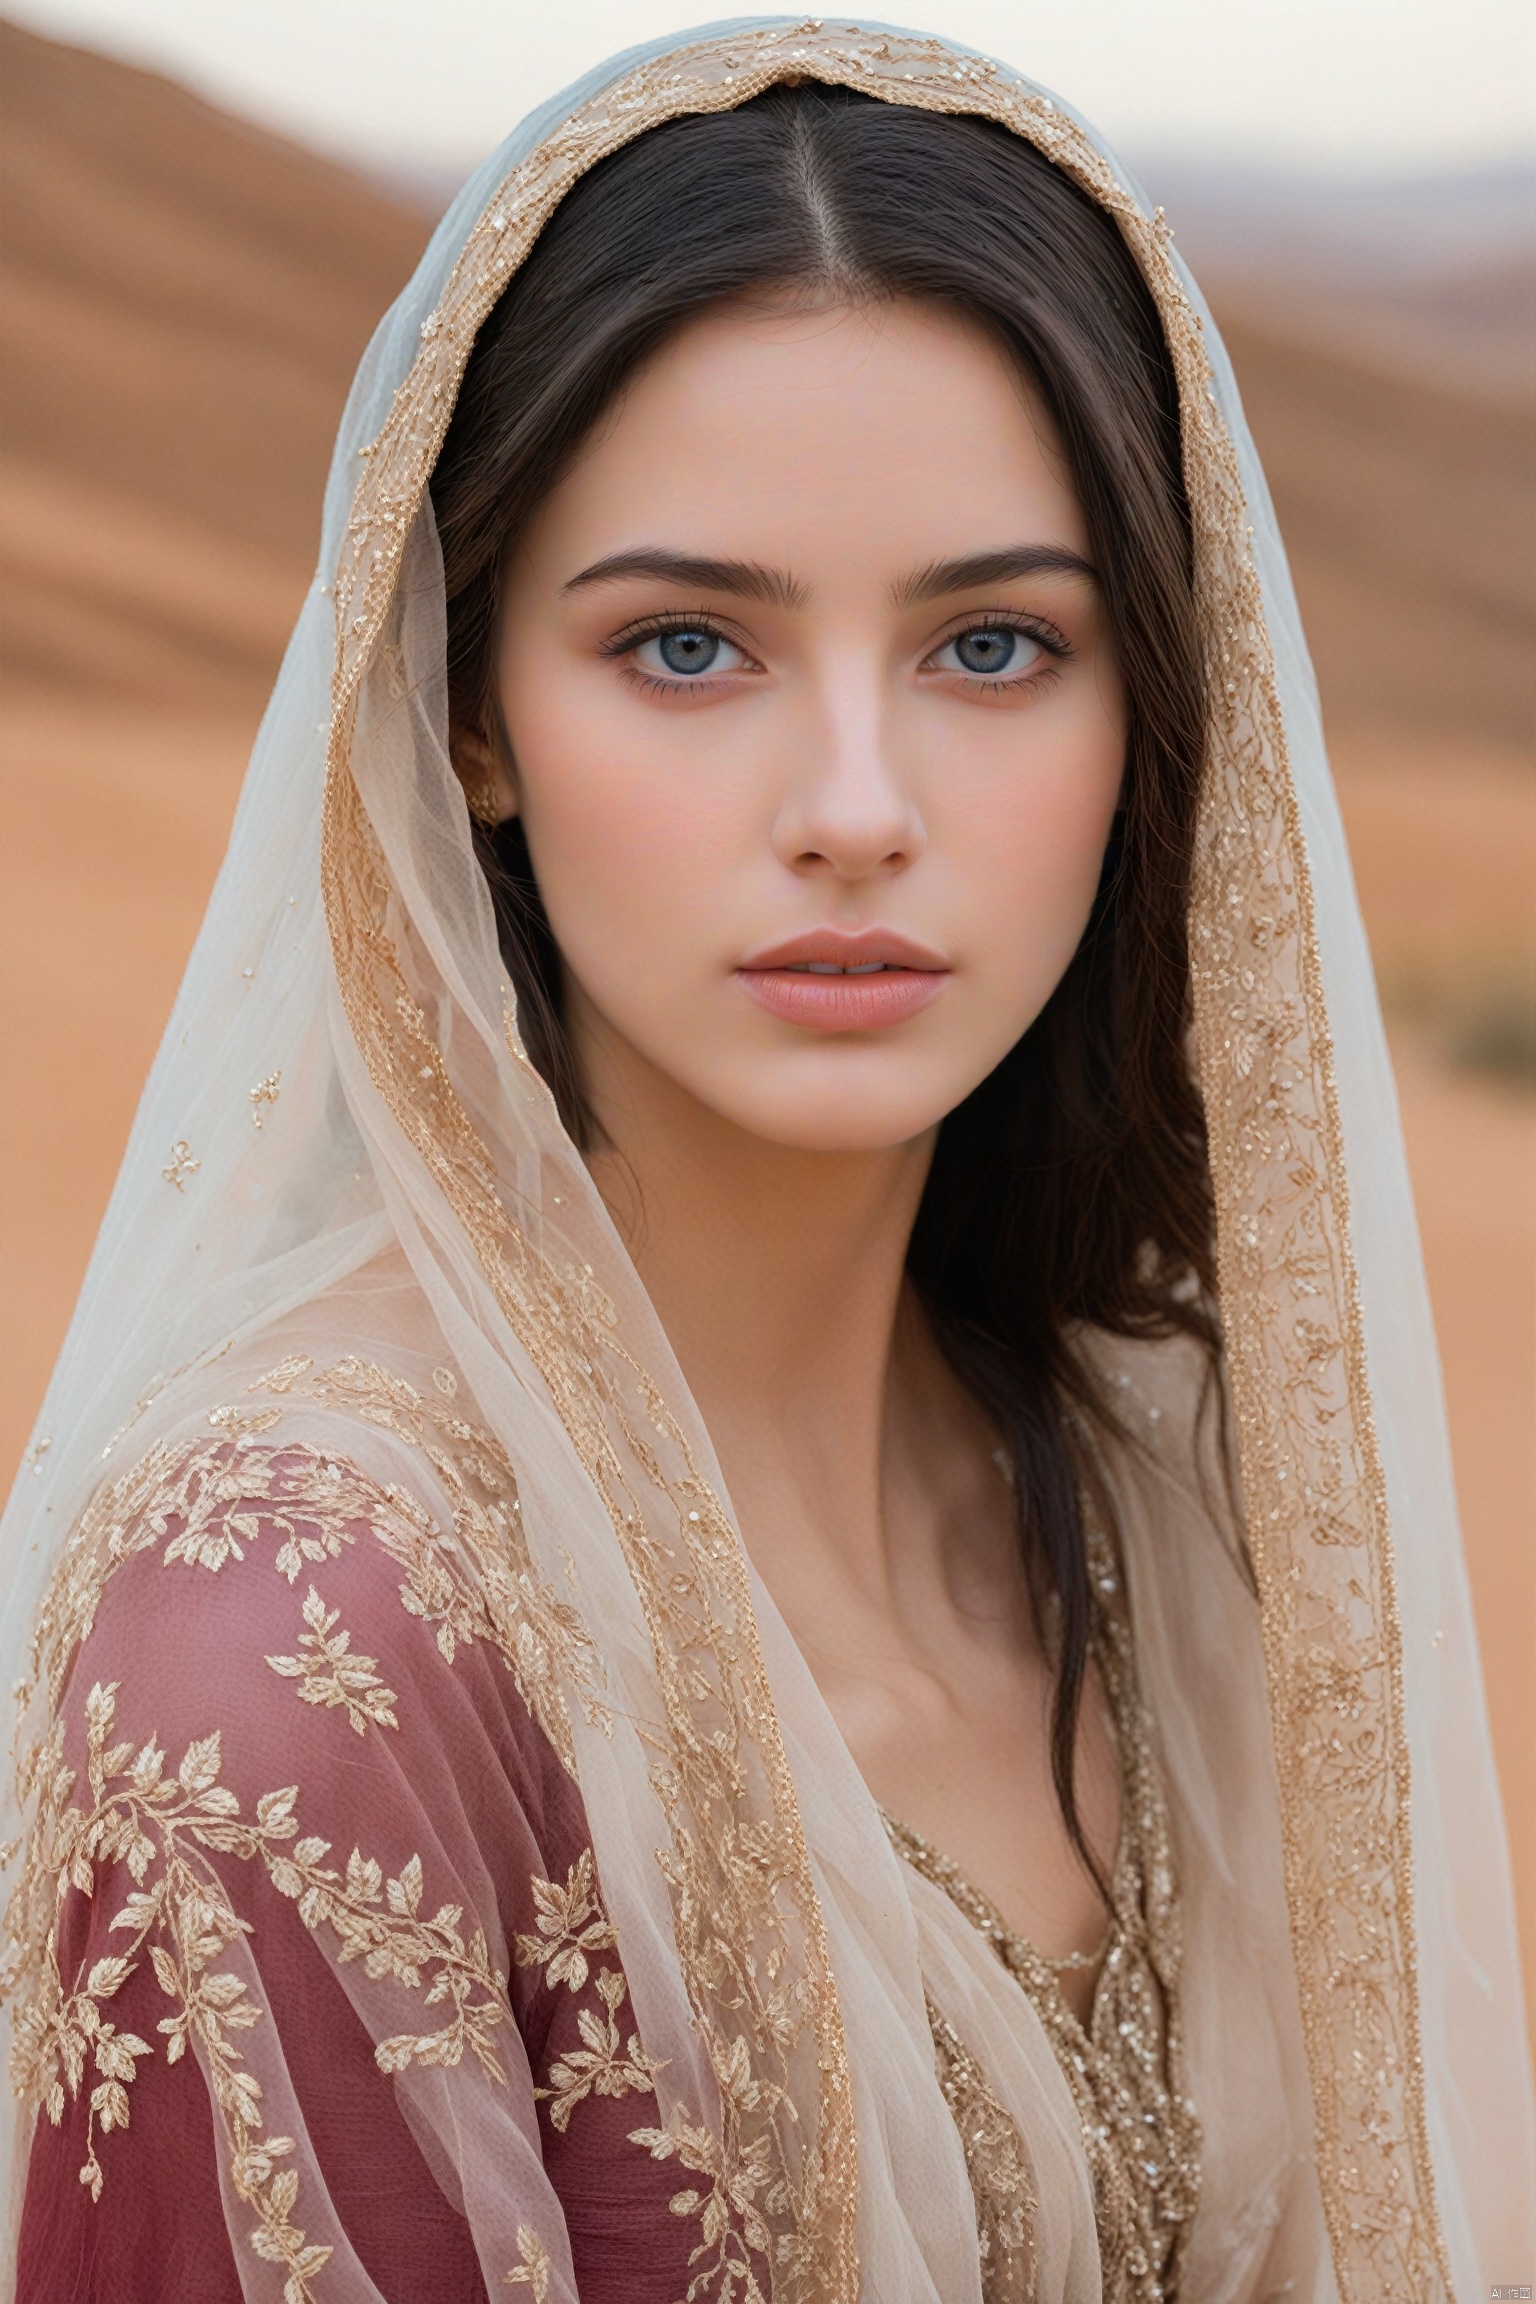 This image shows a close-up of an ethereal-looking young woman with long dark hair falling over her shoulders, blue eyes, her head adorned with a transparent scarf or veil, with the desert in the background, her The complexion was impeccable, with earthy tones on the lids and soft peach on the lips complementing the subtle makeup. She rests her face gently on her hands, exudes calm and poise, wears a burgundy embroidered gown, photo realistic, best quality, super high resolution, extremely detailed eyes and face, full body showing face audience,